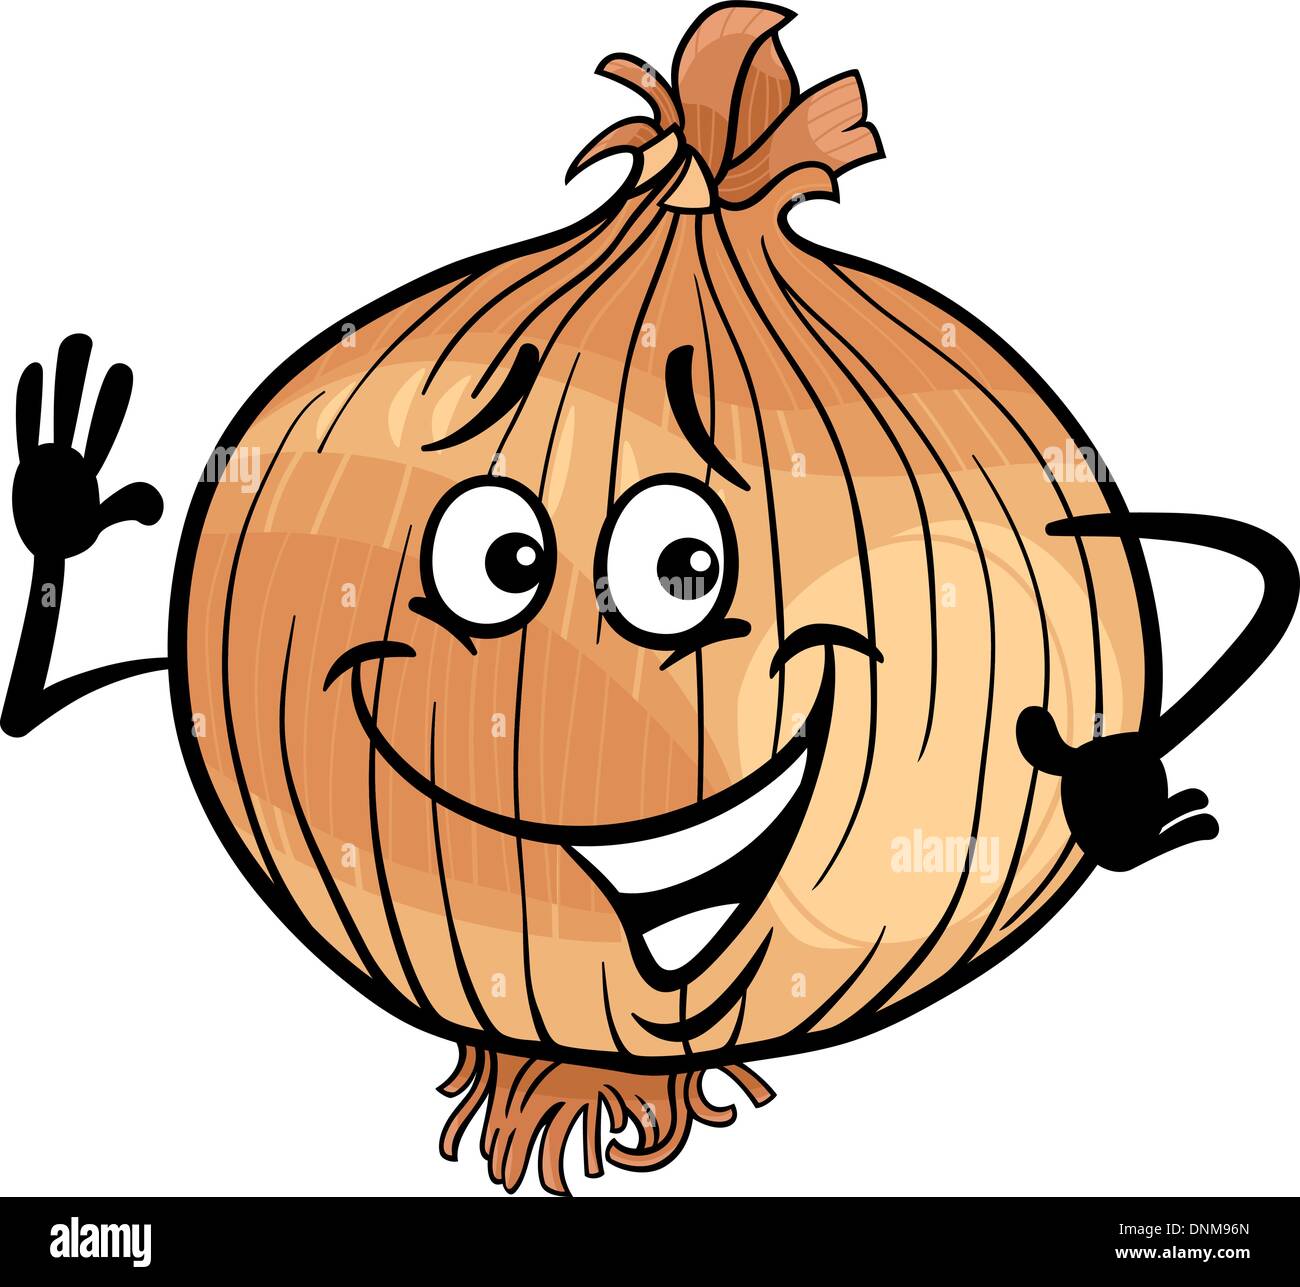 Cartoon Illustration of Funny Comic Onion Root Vegetable Food Character  Stock Vector Image & Art - Alamy